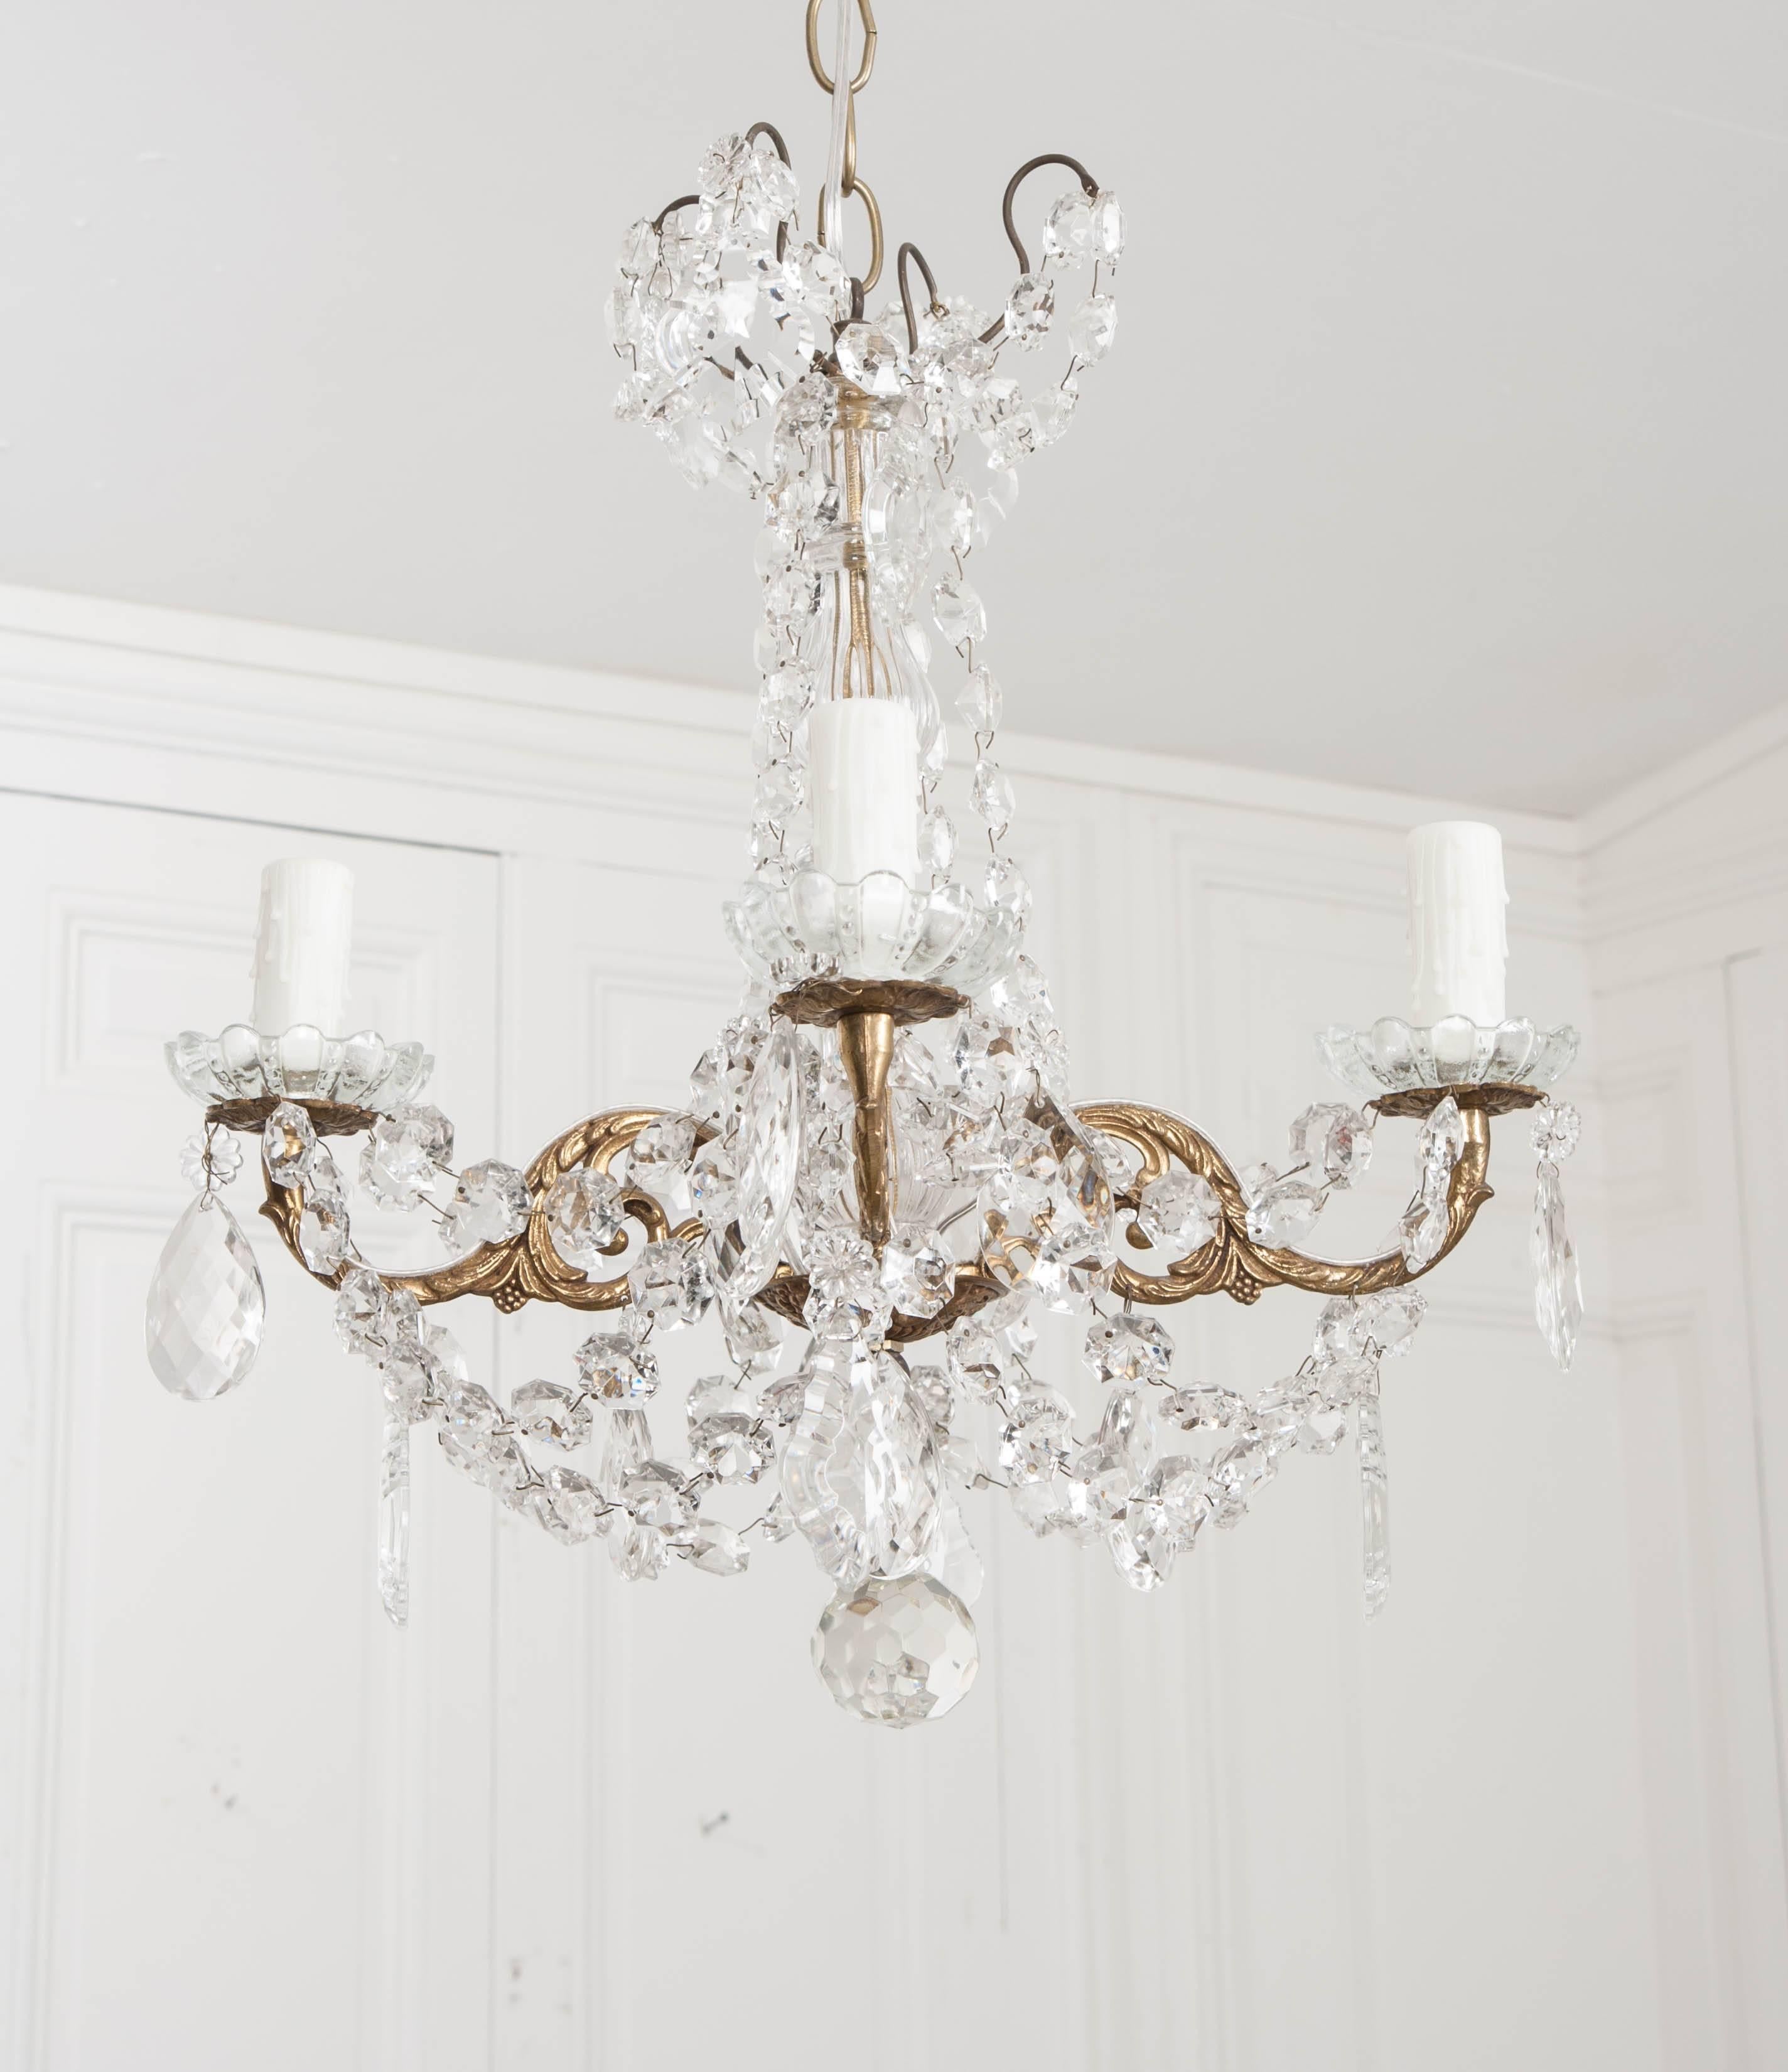 A lovely crystal and brass chandelier, made in France circa 1890. The four-light fixture is a stunning combination of cut crystals and scrolled, styled brass that form the dazzling antique. The brass frame is cast with scrolled acanthus motifs and